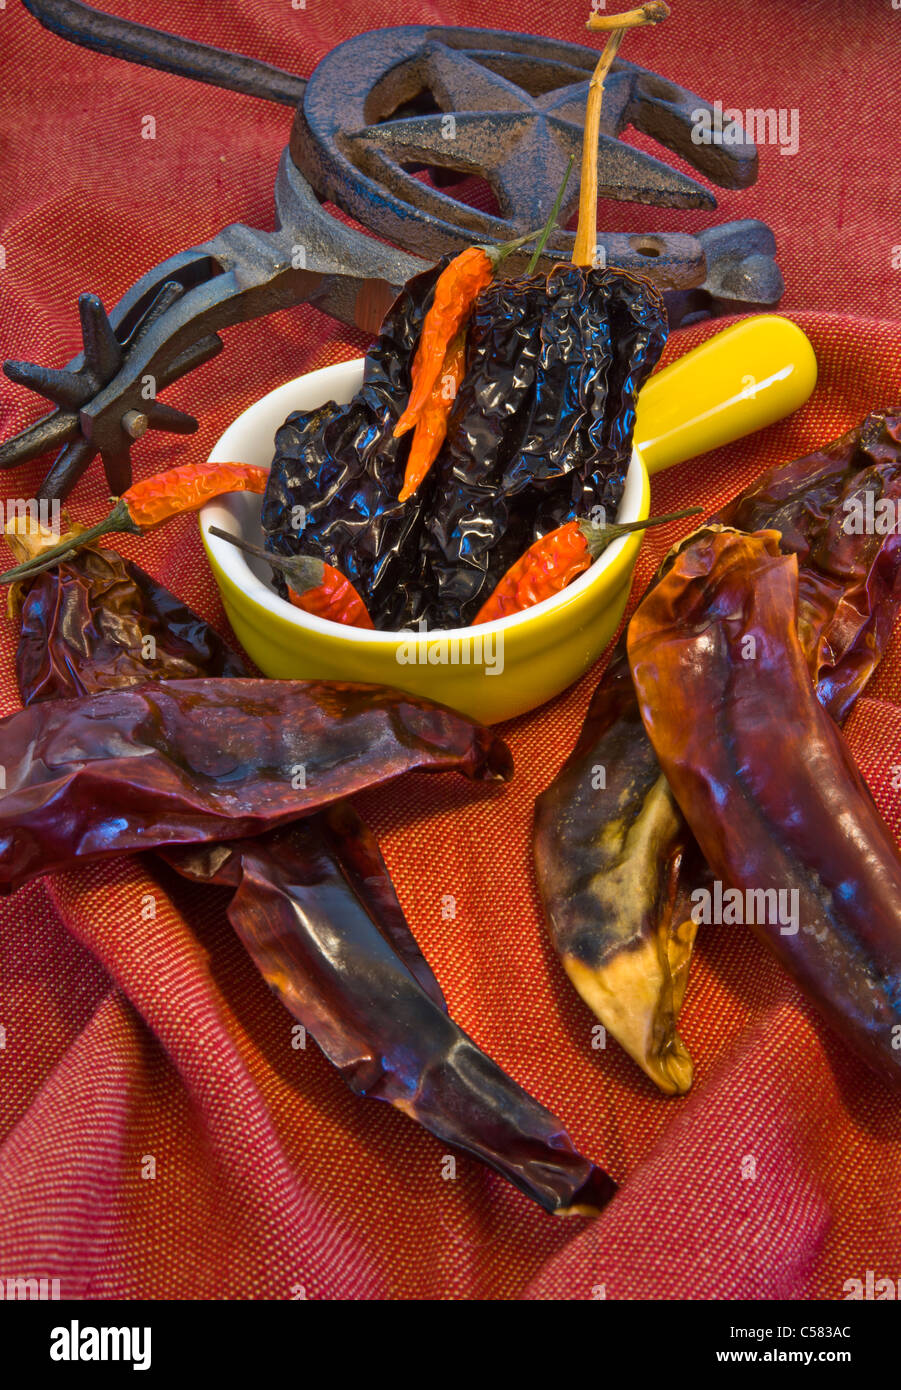 A southwestern view of red dried chili's. Stock Photo